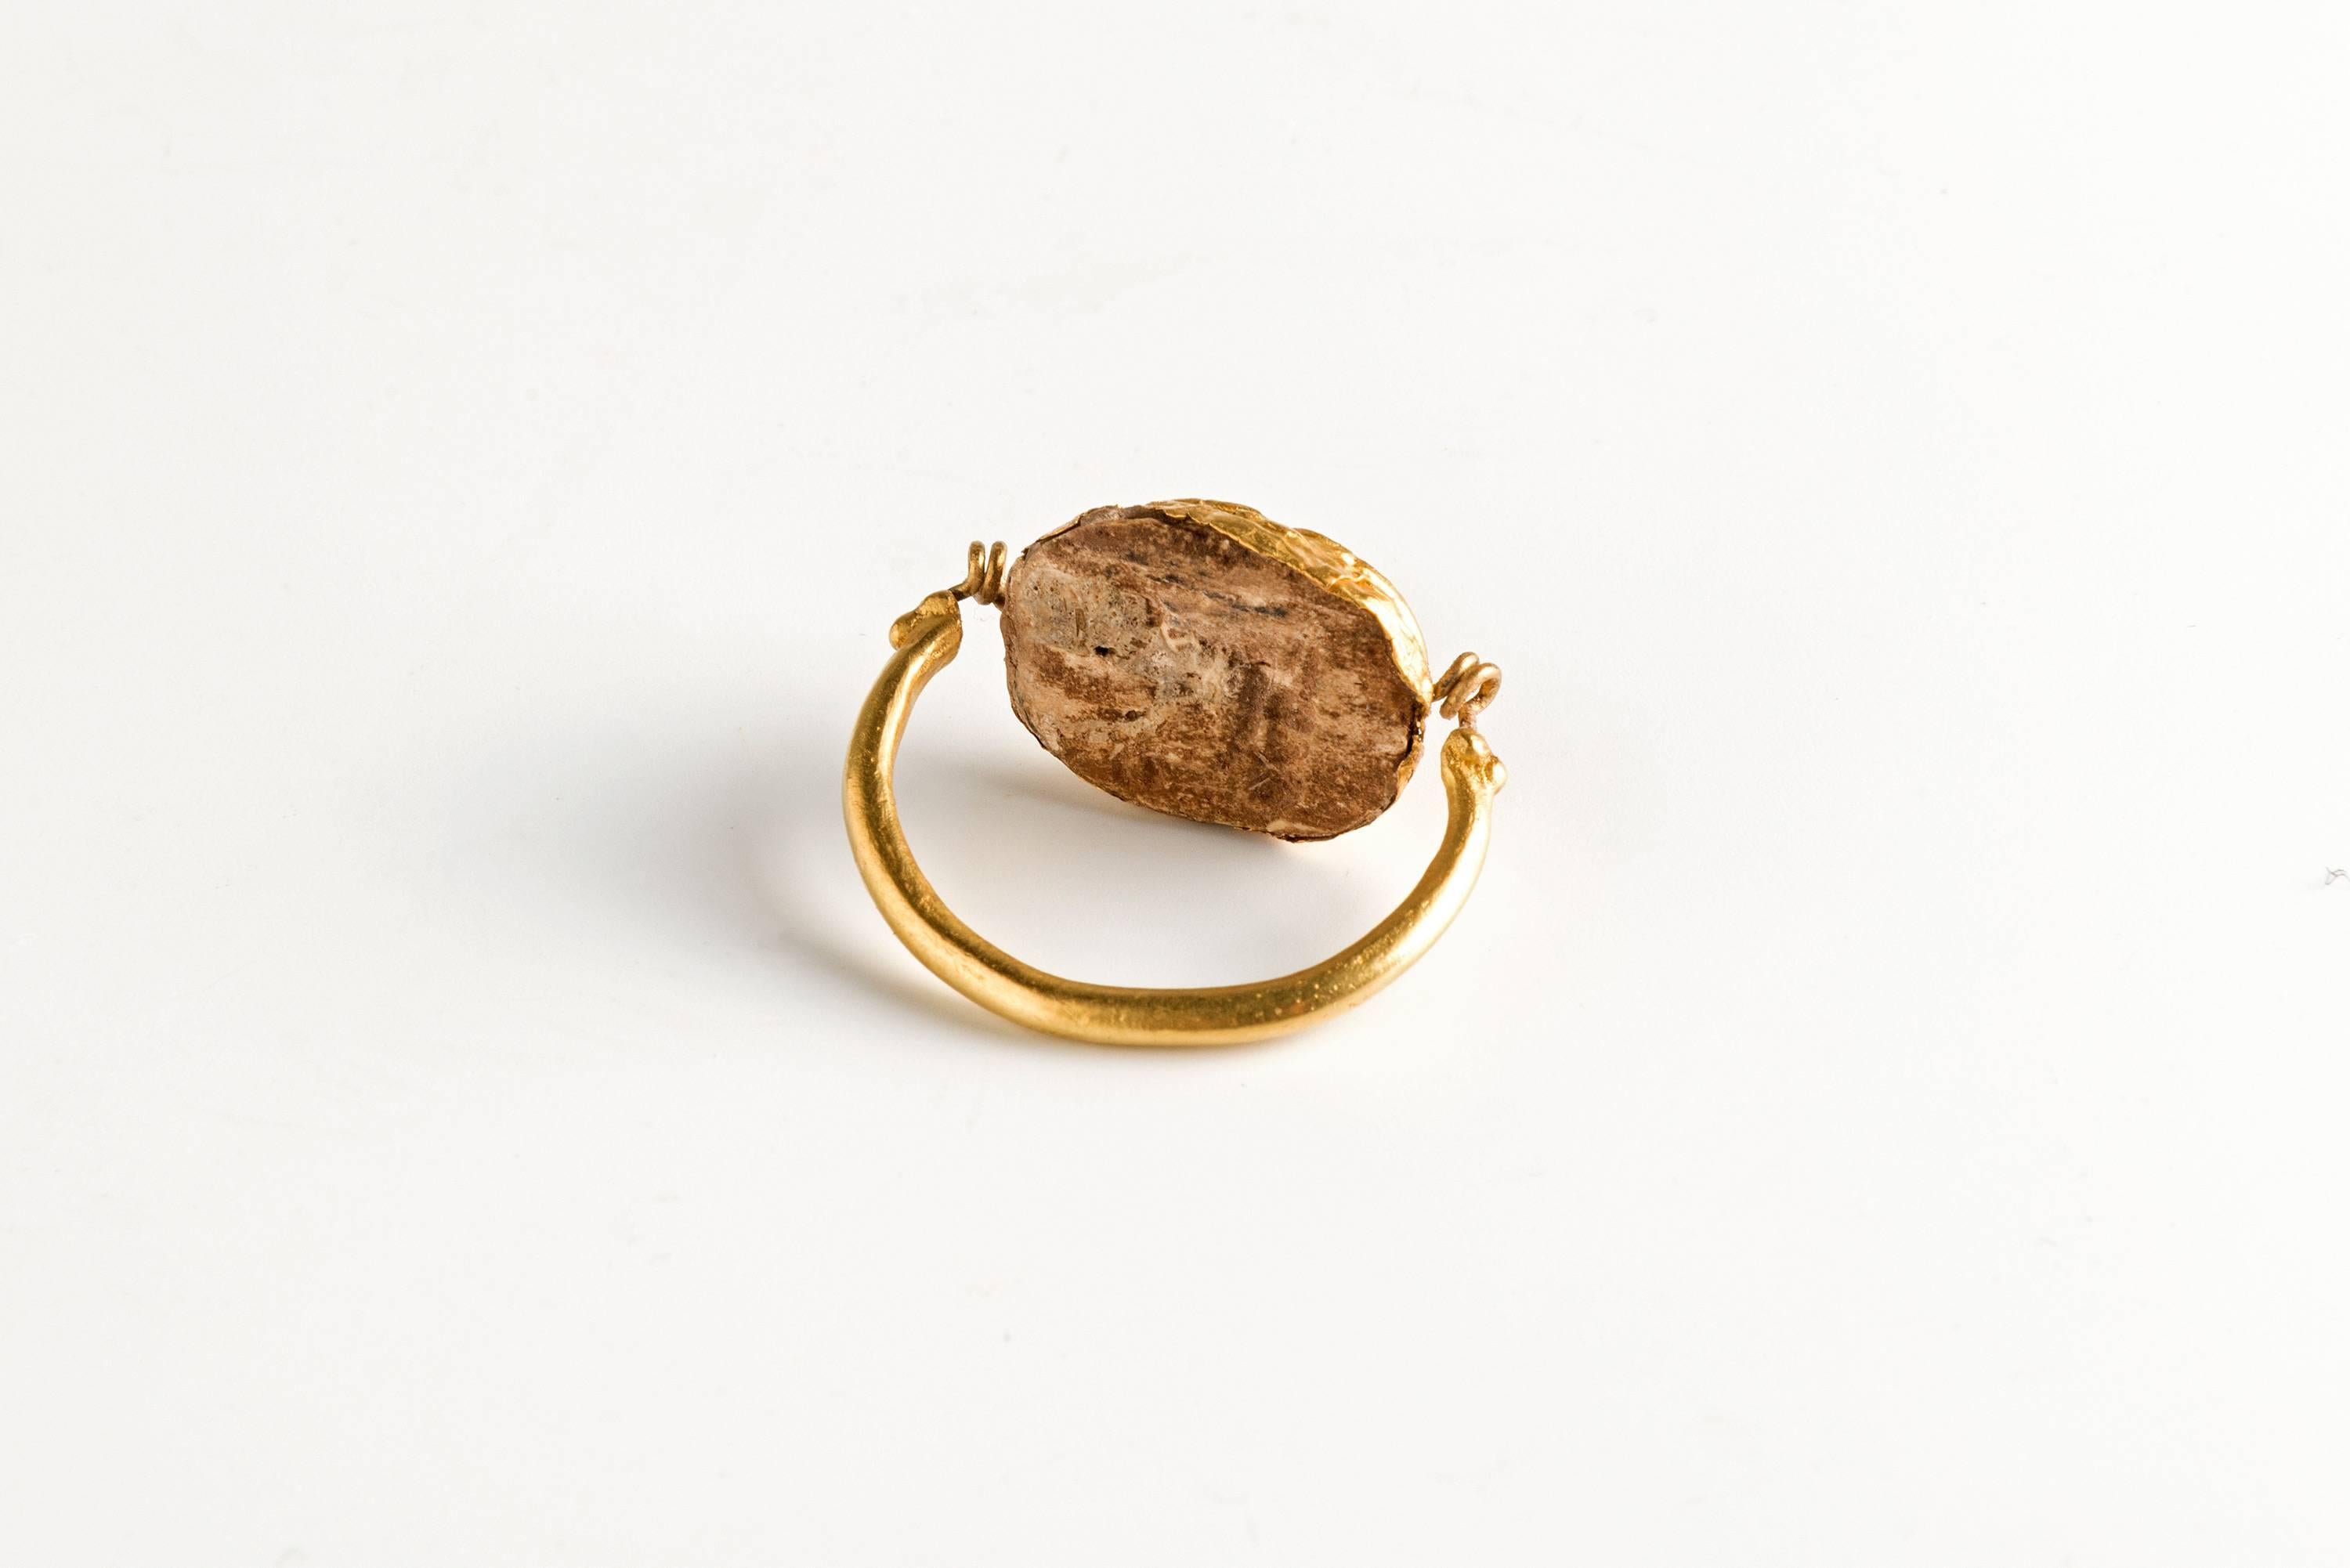 Finger ring in 22-karat gold with a swivelling scarab bezel in a golden leaf of 24-karat gold. Phoenician, circa 1400 BC.
The steatite scarab shows a sphinx. This ring is fragile but wearable and has Museum quality.
Accompanied by a certificate of